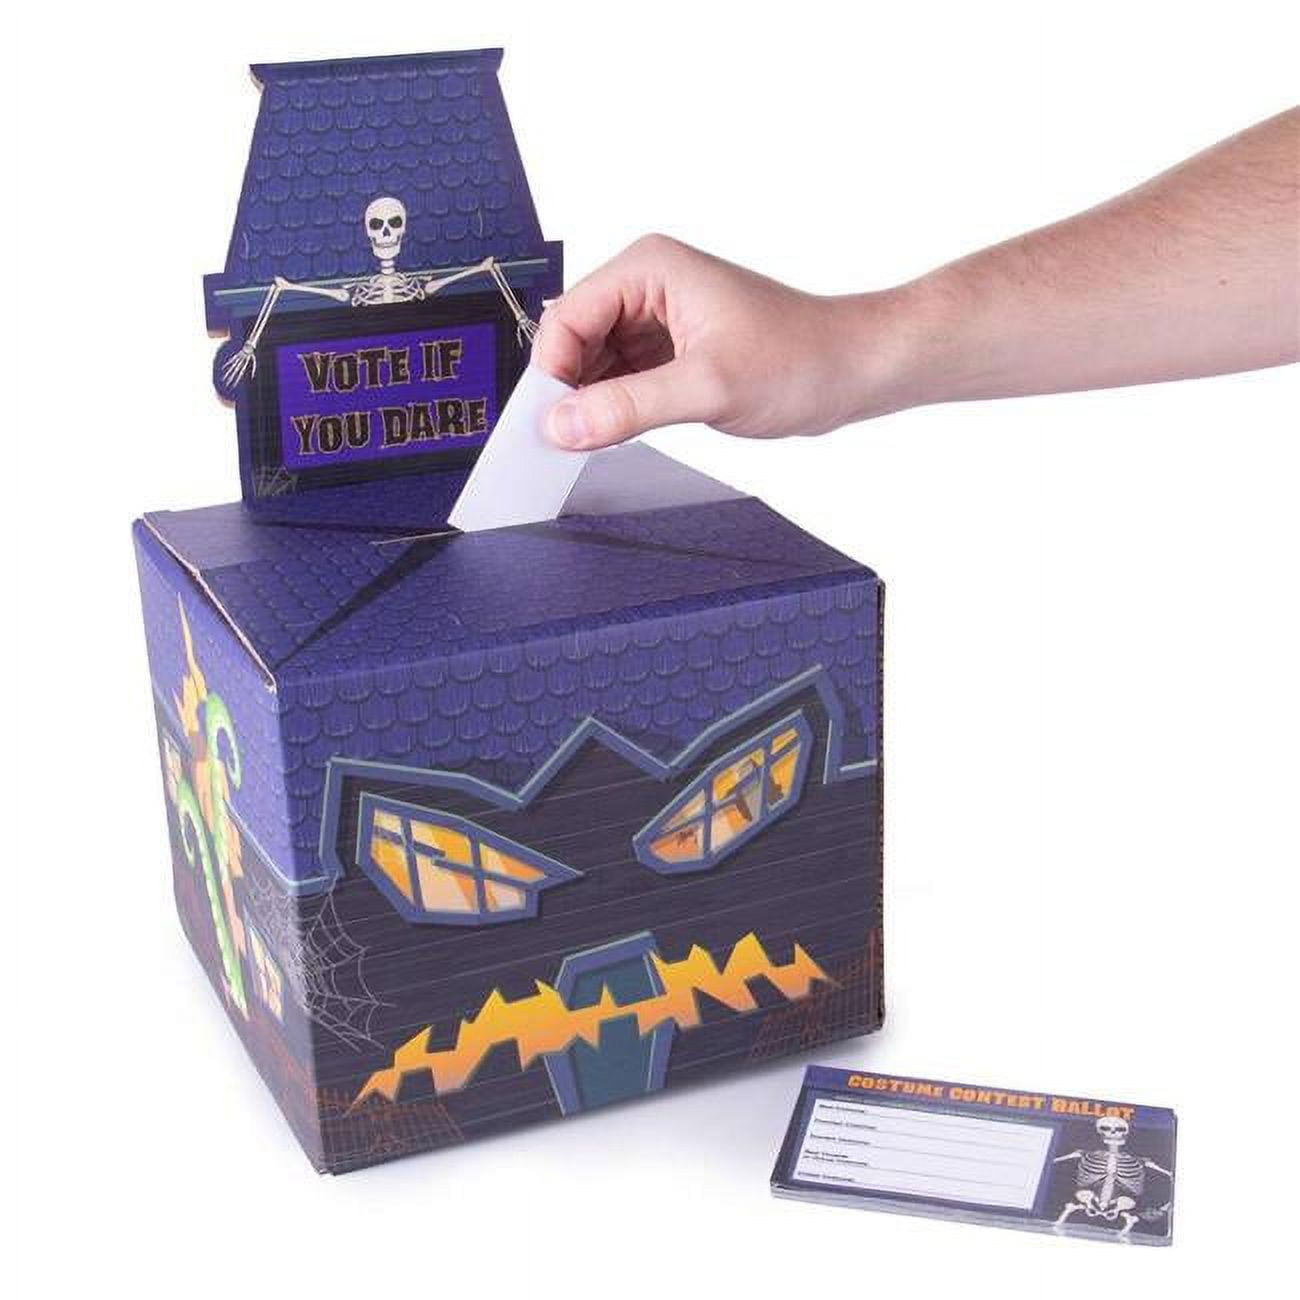 Picture of Brybelly MPAR-911 Costume Party Ballot Box with Ballots